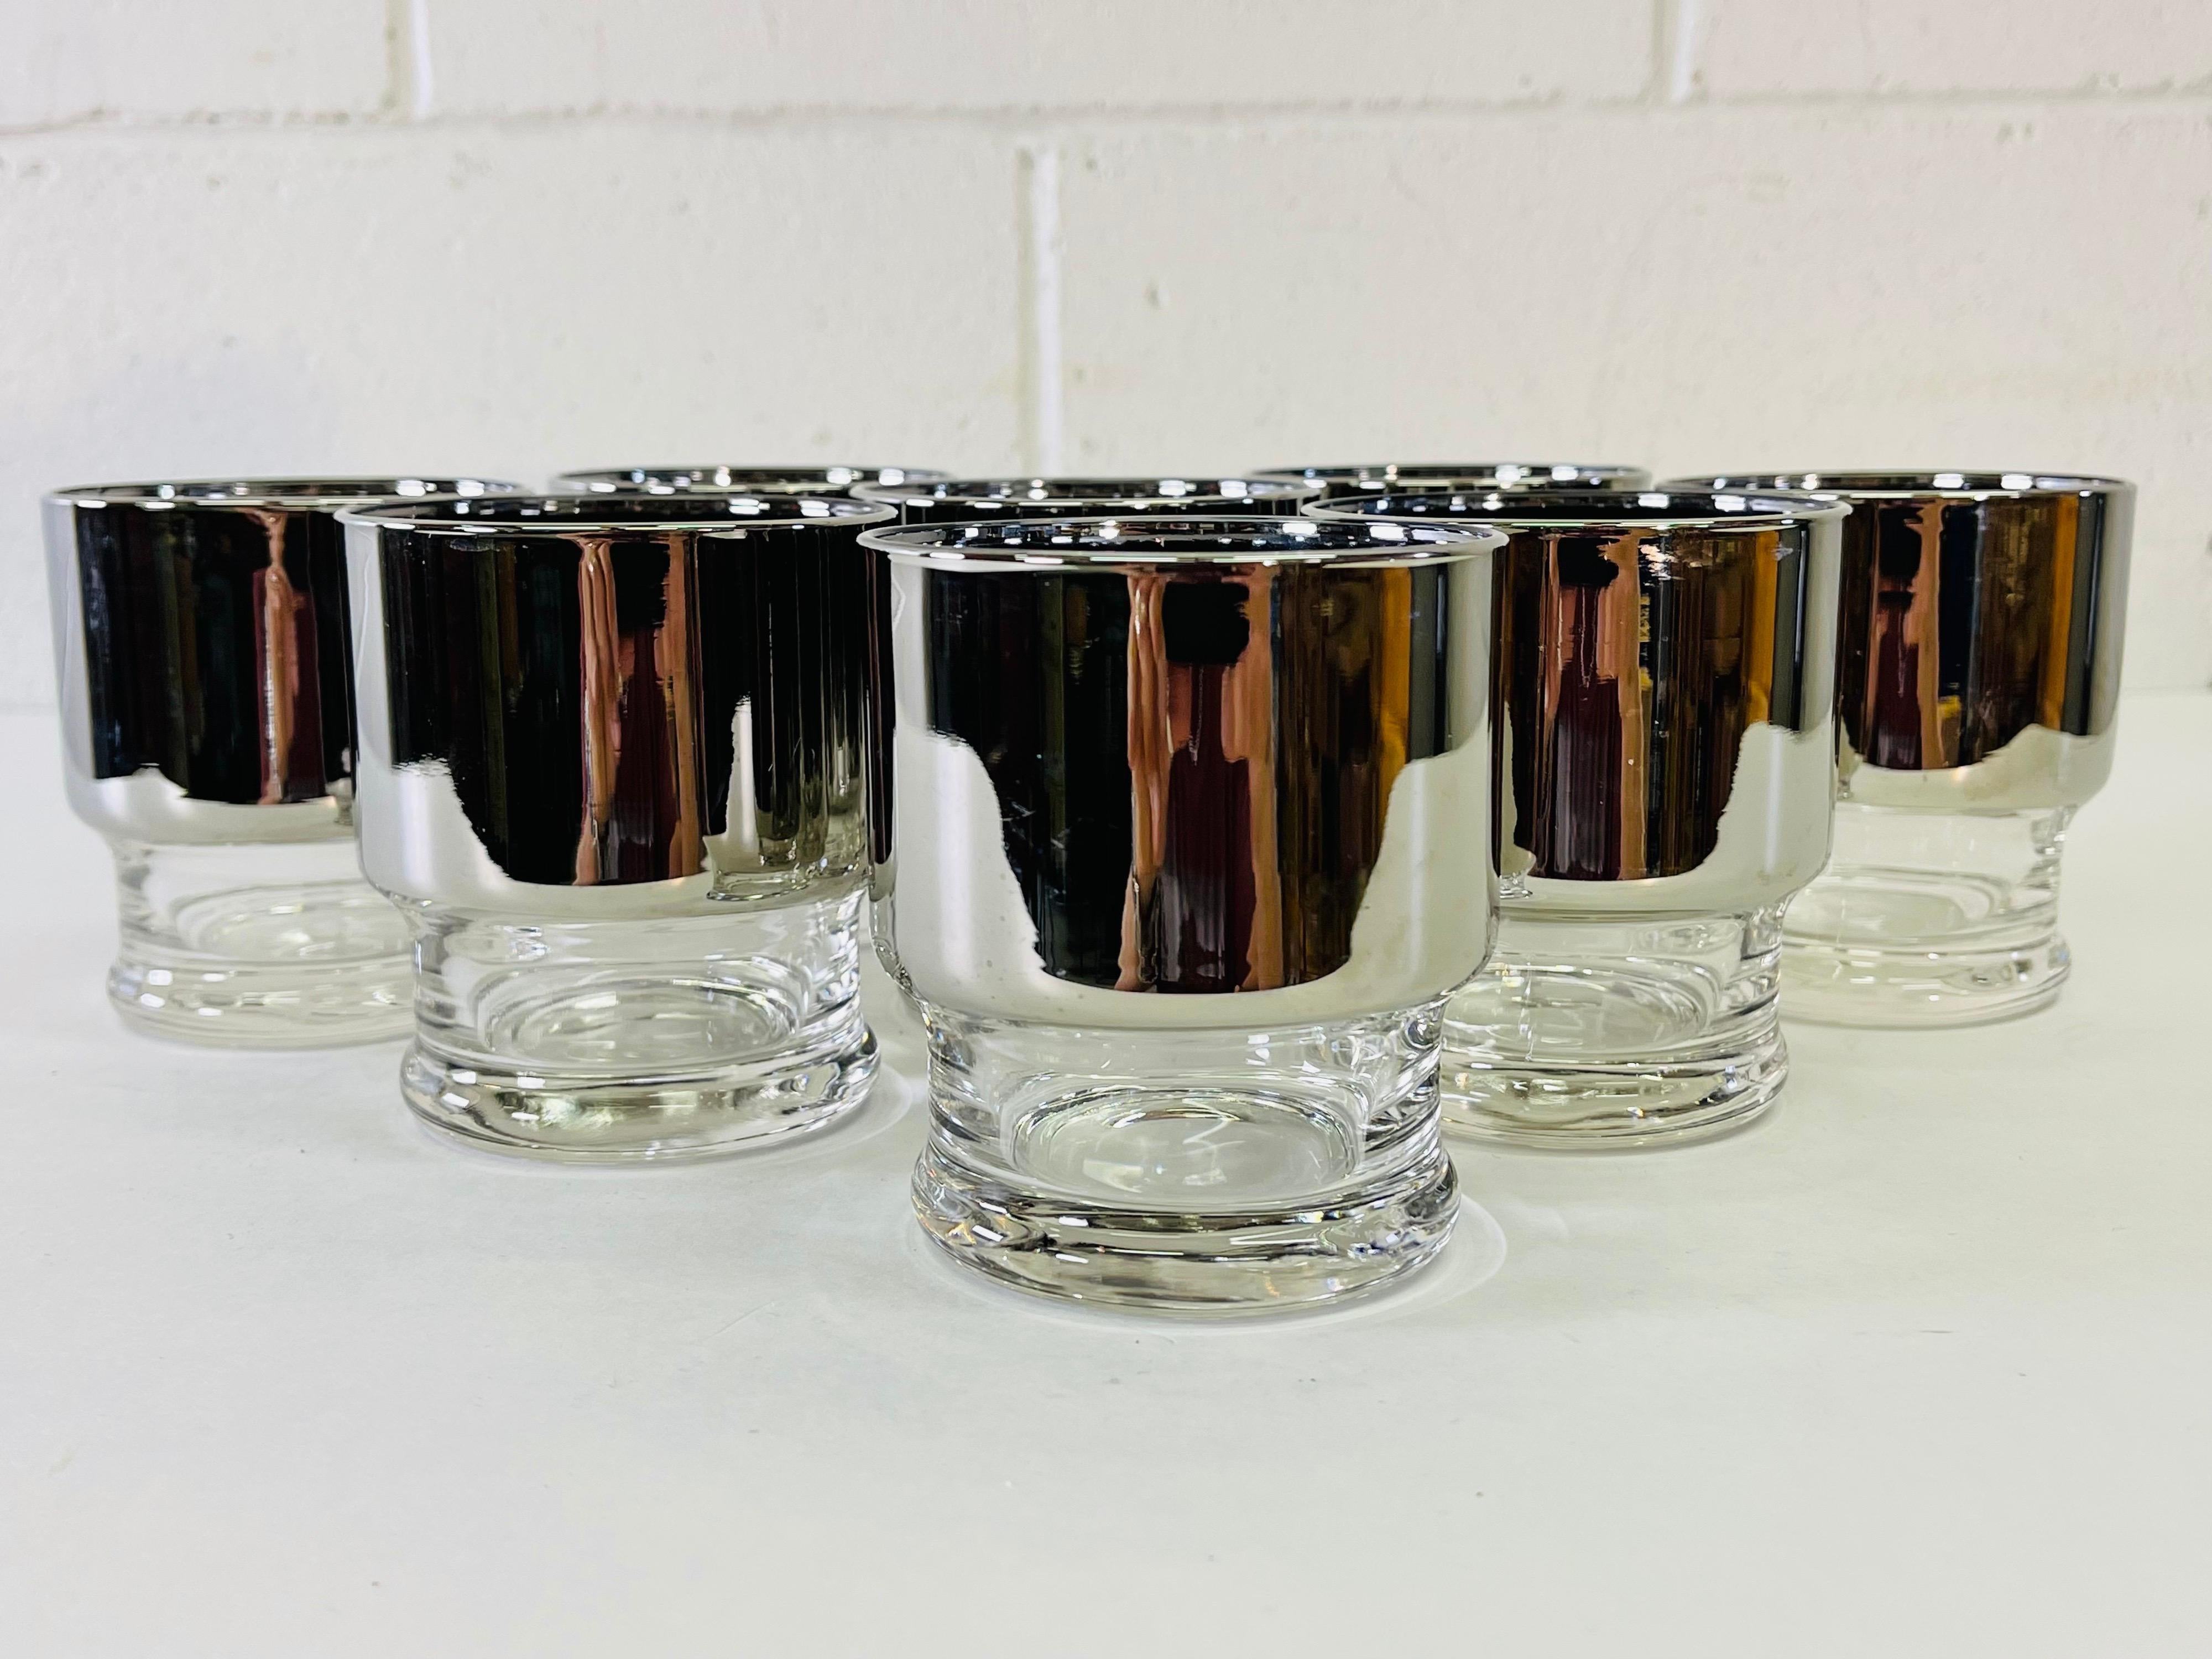 Vintage 1960s set of 8 silver wide-band glass tumblers. No marks.